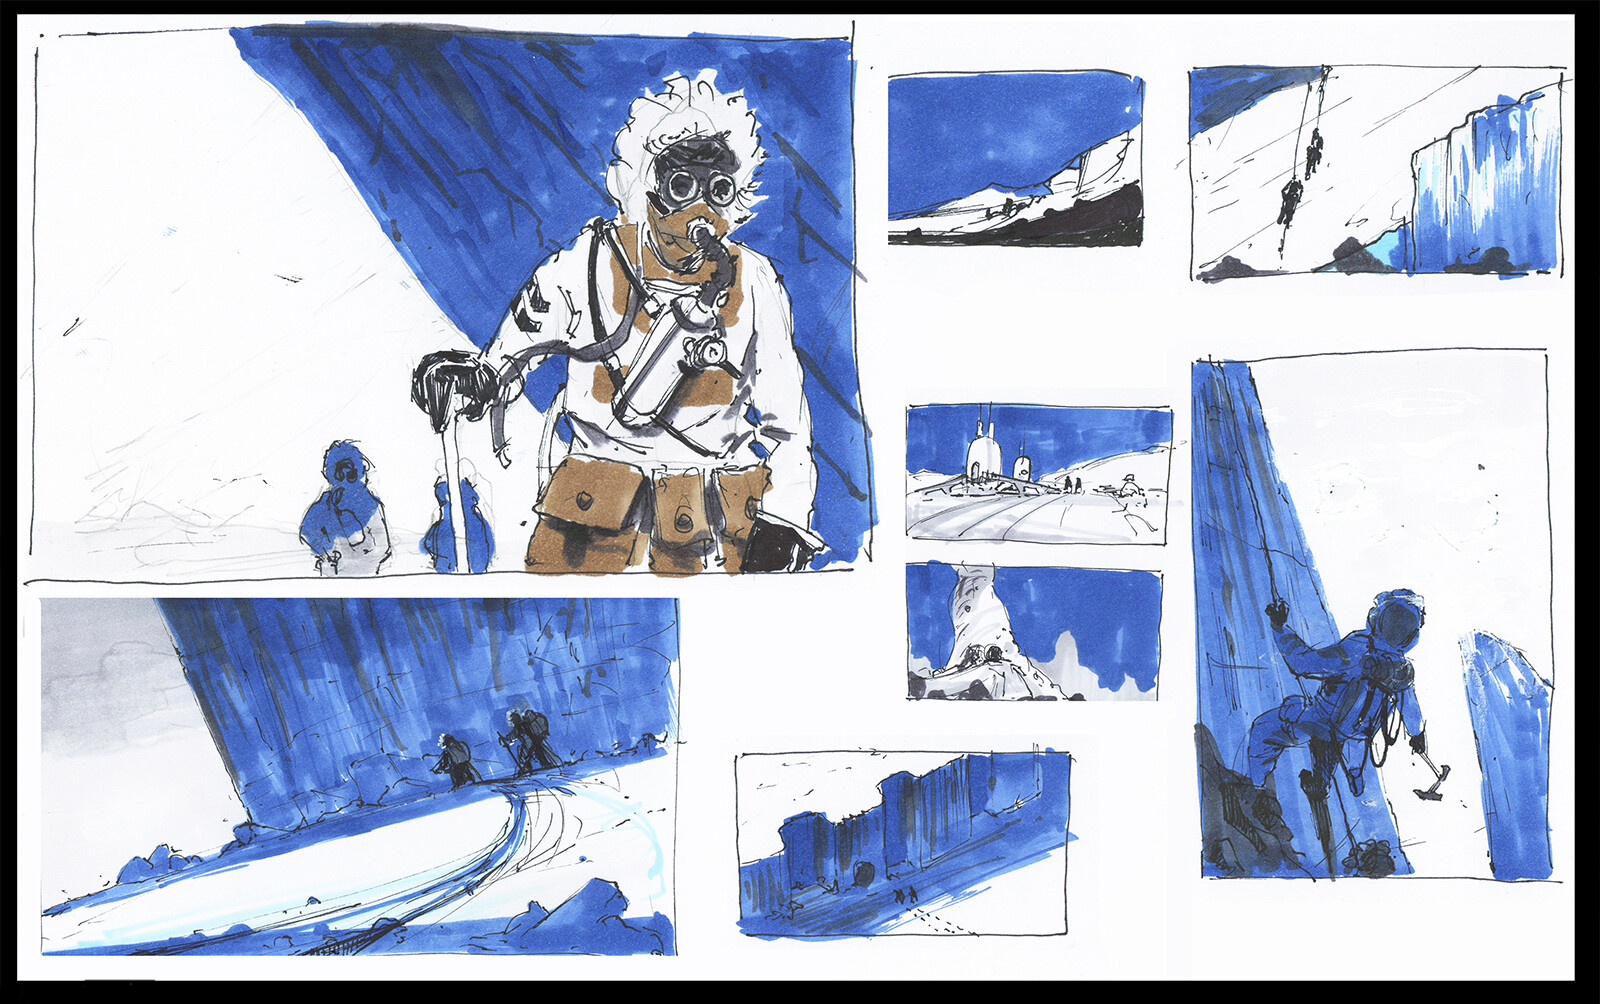 Extremely early sketches for composition and setting the mood of adventuring into a new place